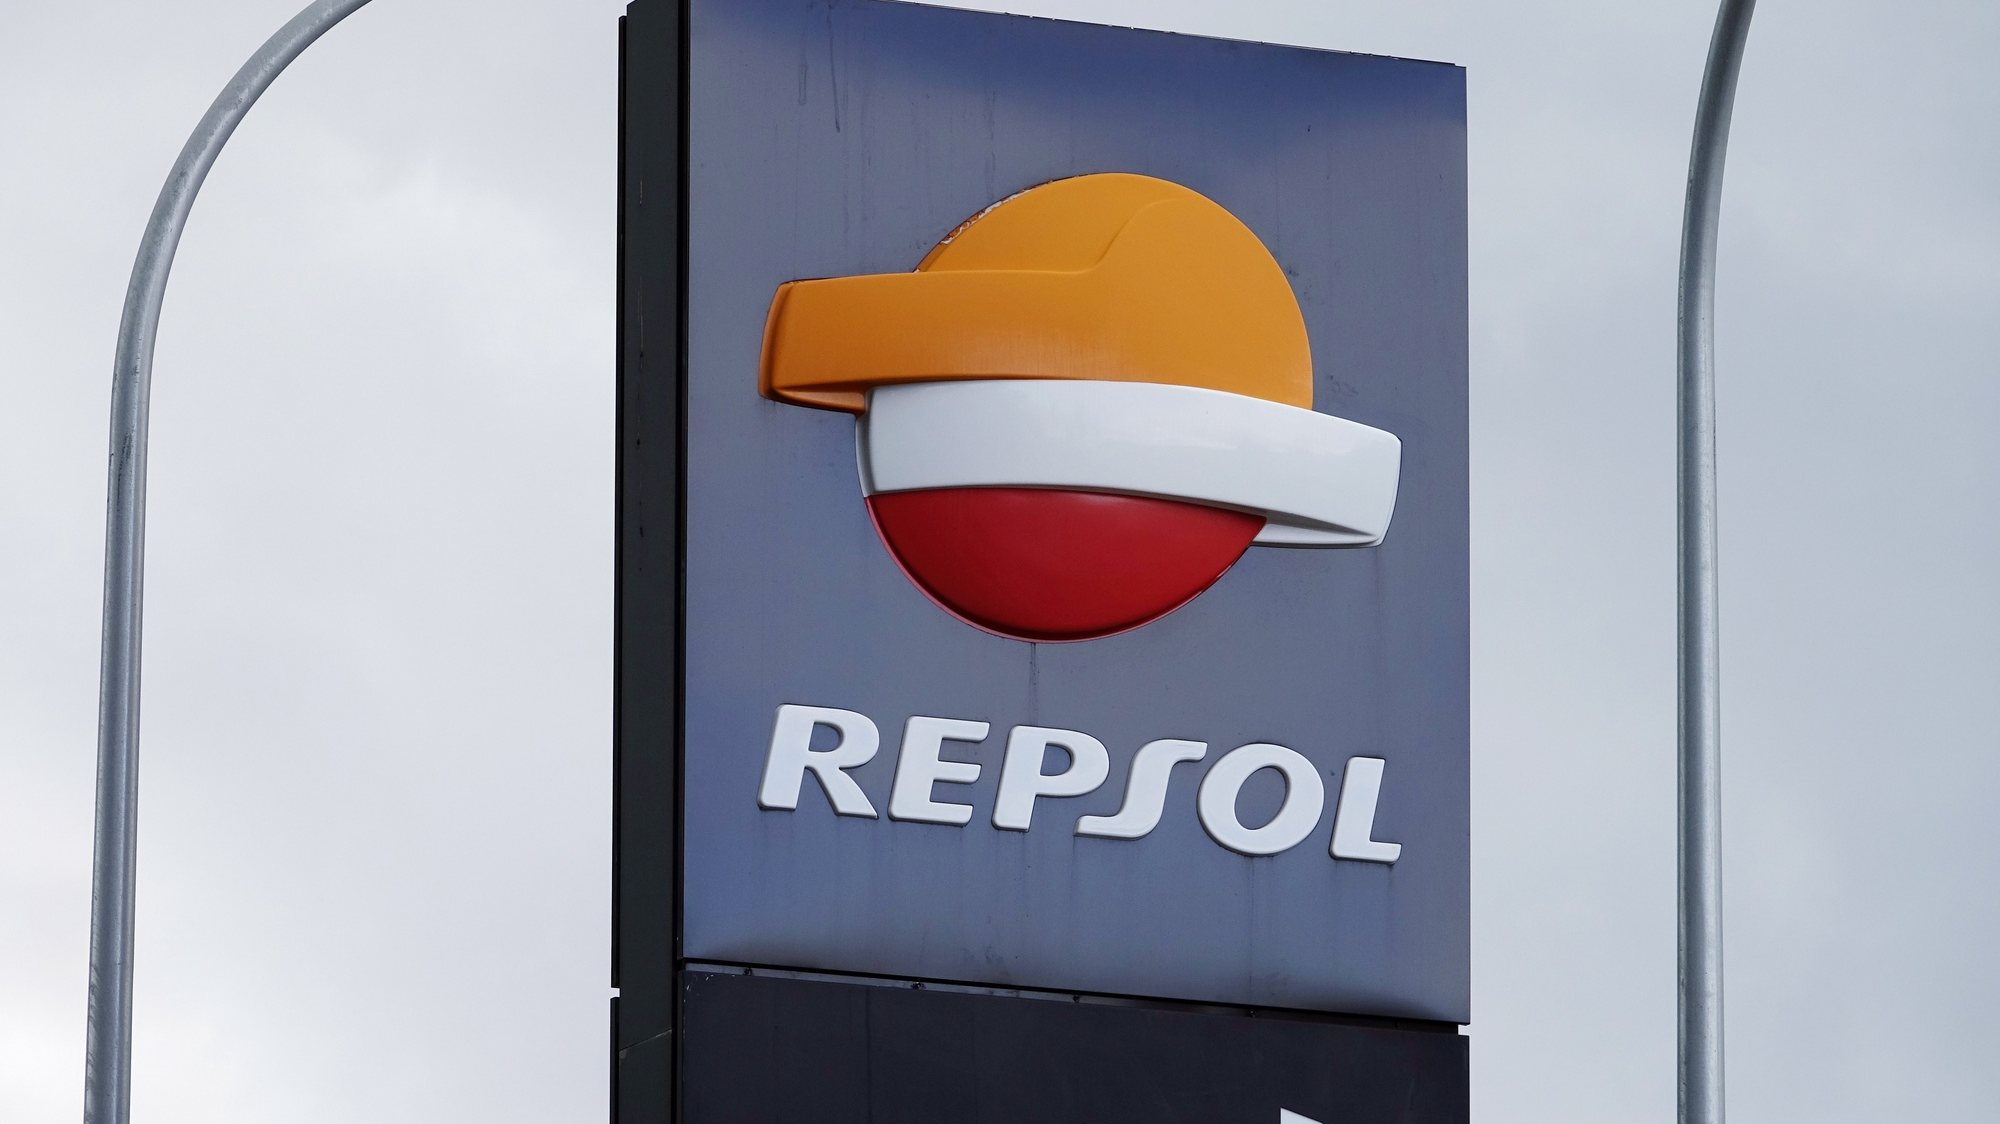 epa09017912 (FILE) - A general view of signage at a Repsol service station in Malaga, Spain, 16 October 2018 (reissued 17 February 2021). Repsol is due to publish its 4th quarter 2020 financial results on 18 February 2021.  EPA/MAURITZ ANTIN *** Local Caption *** 54740852